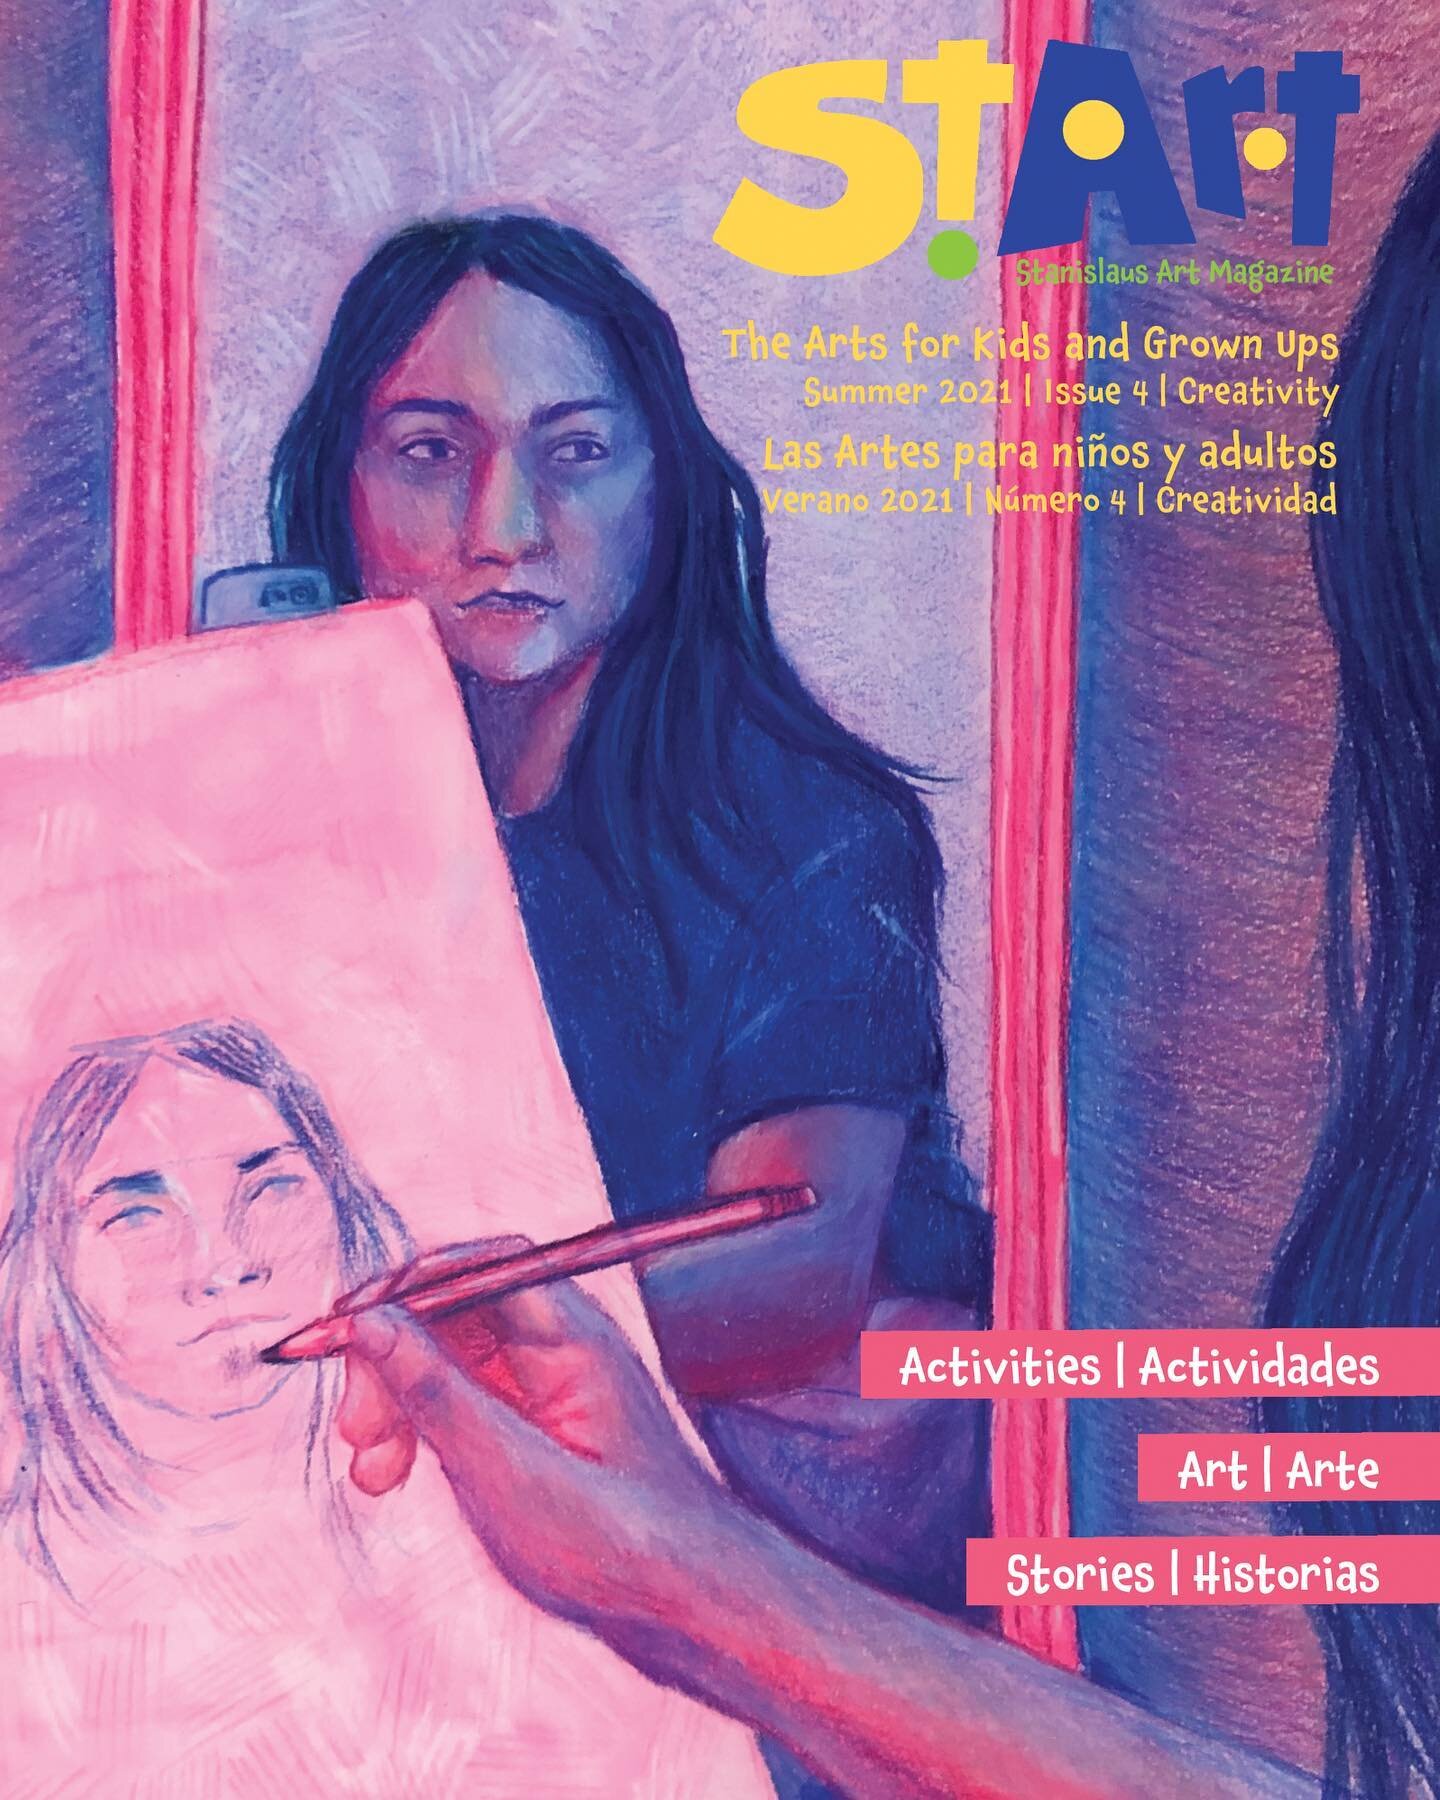 Cover reveal! Our upcoming issue will be about creativity and self expression. The cover art is by CVHS art student Itzel Guzman, called Selfie Self Portrait. Order your copy now for July delivery. Link in bio. 

#StanislausArtMagazine #StanislausCou